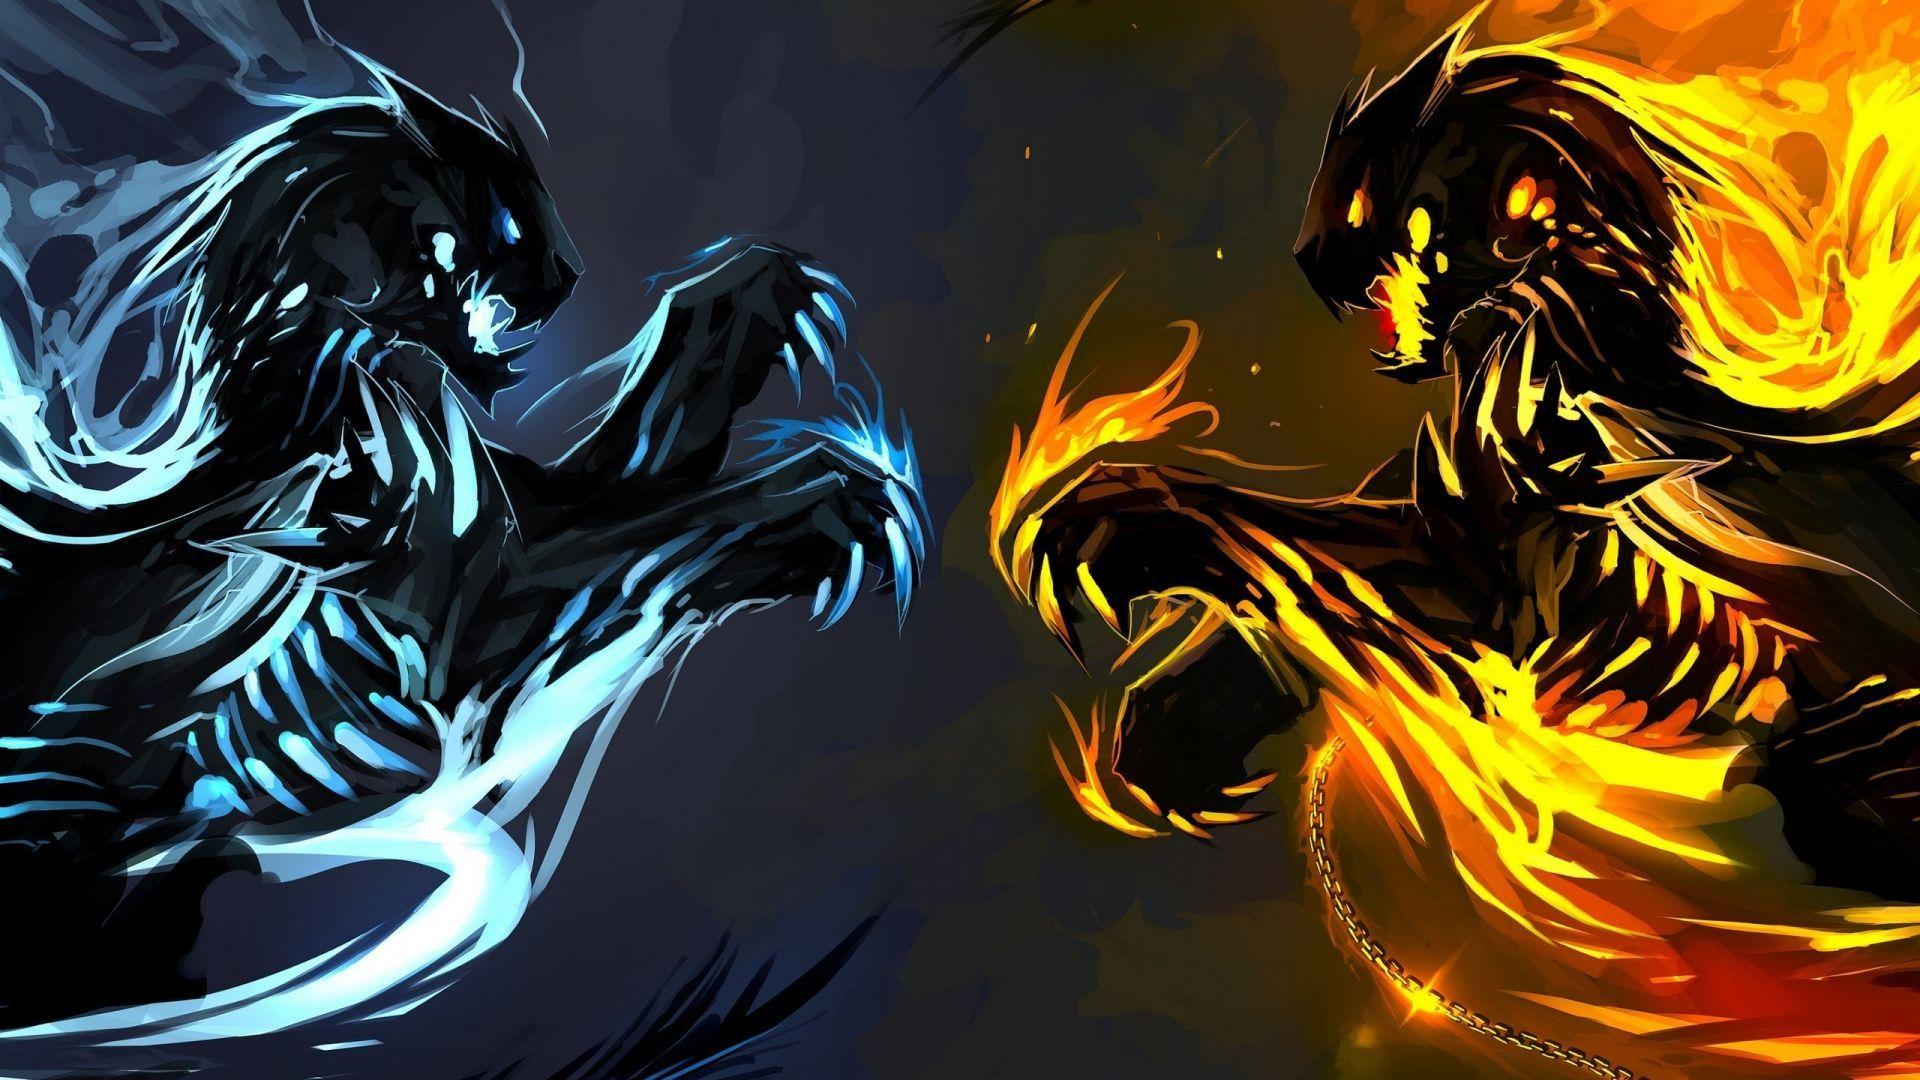 Ice and Fire Dragons wallpaper 2560x1440. Fire and ice dragons, Ice dragon, Fire